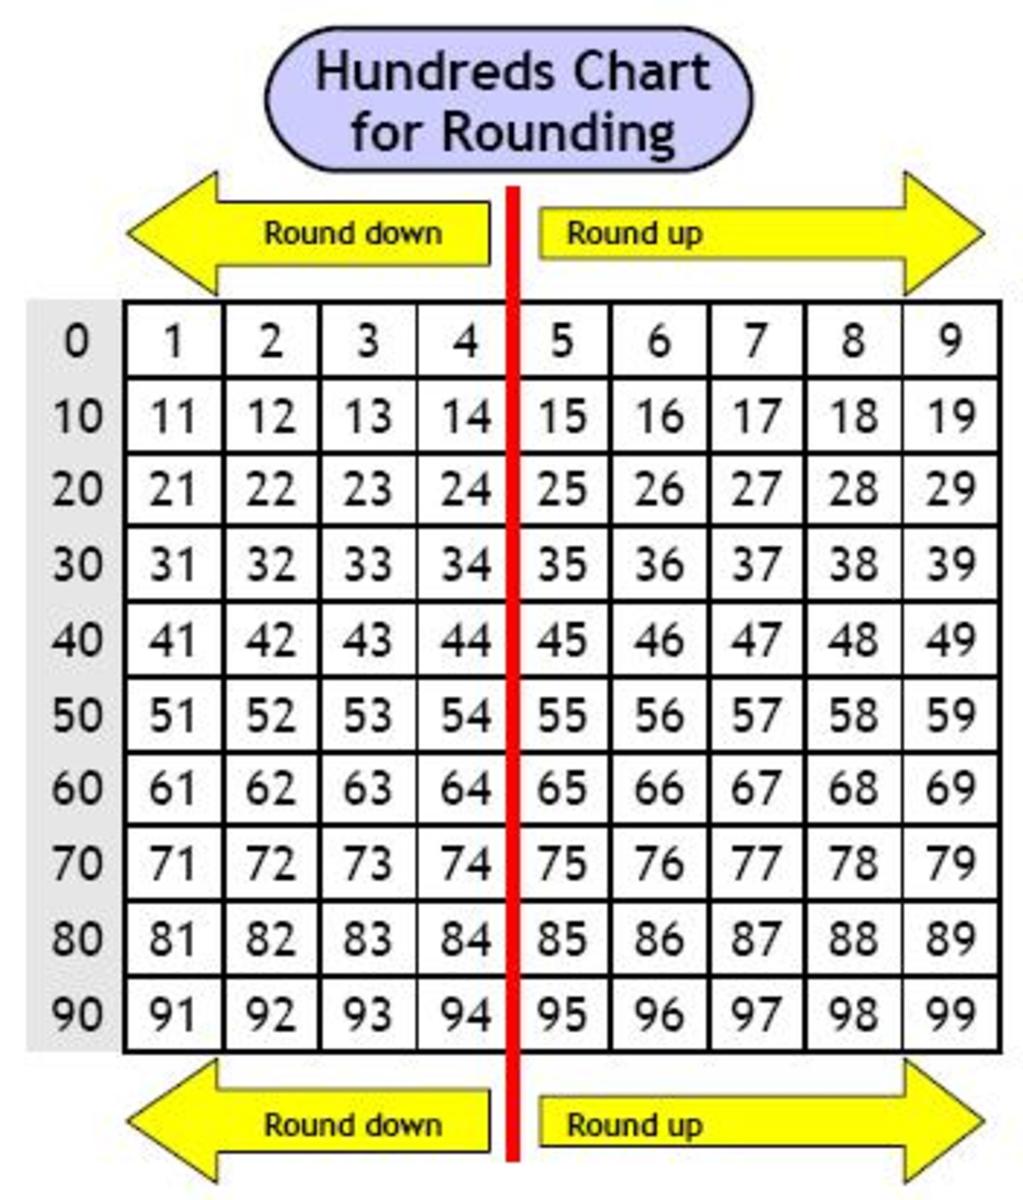 maths-help-how-to-round-a-number-to-the-nearest-10-100-or-1000-simple-rounding-rule-to-use-for